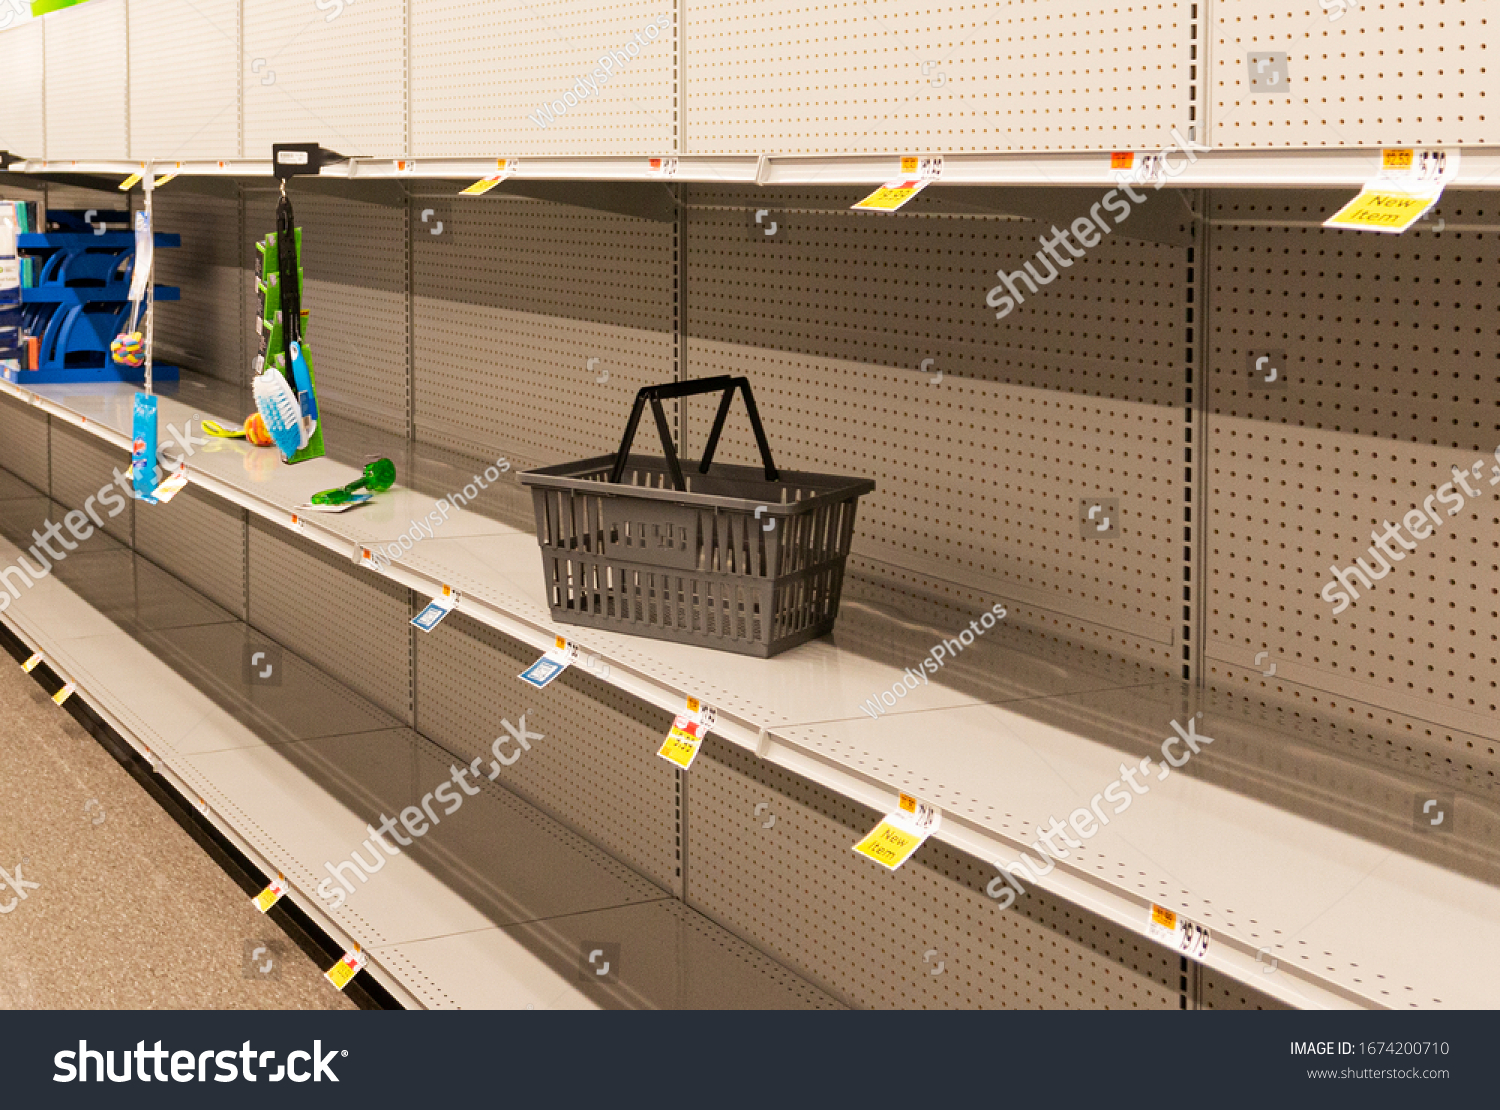 Grocery store shelves are empty due to panic buying caused for the caronavirus pandemic. #1674200710